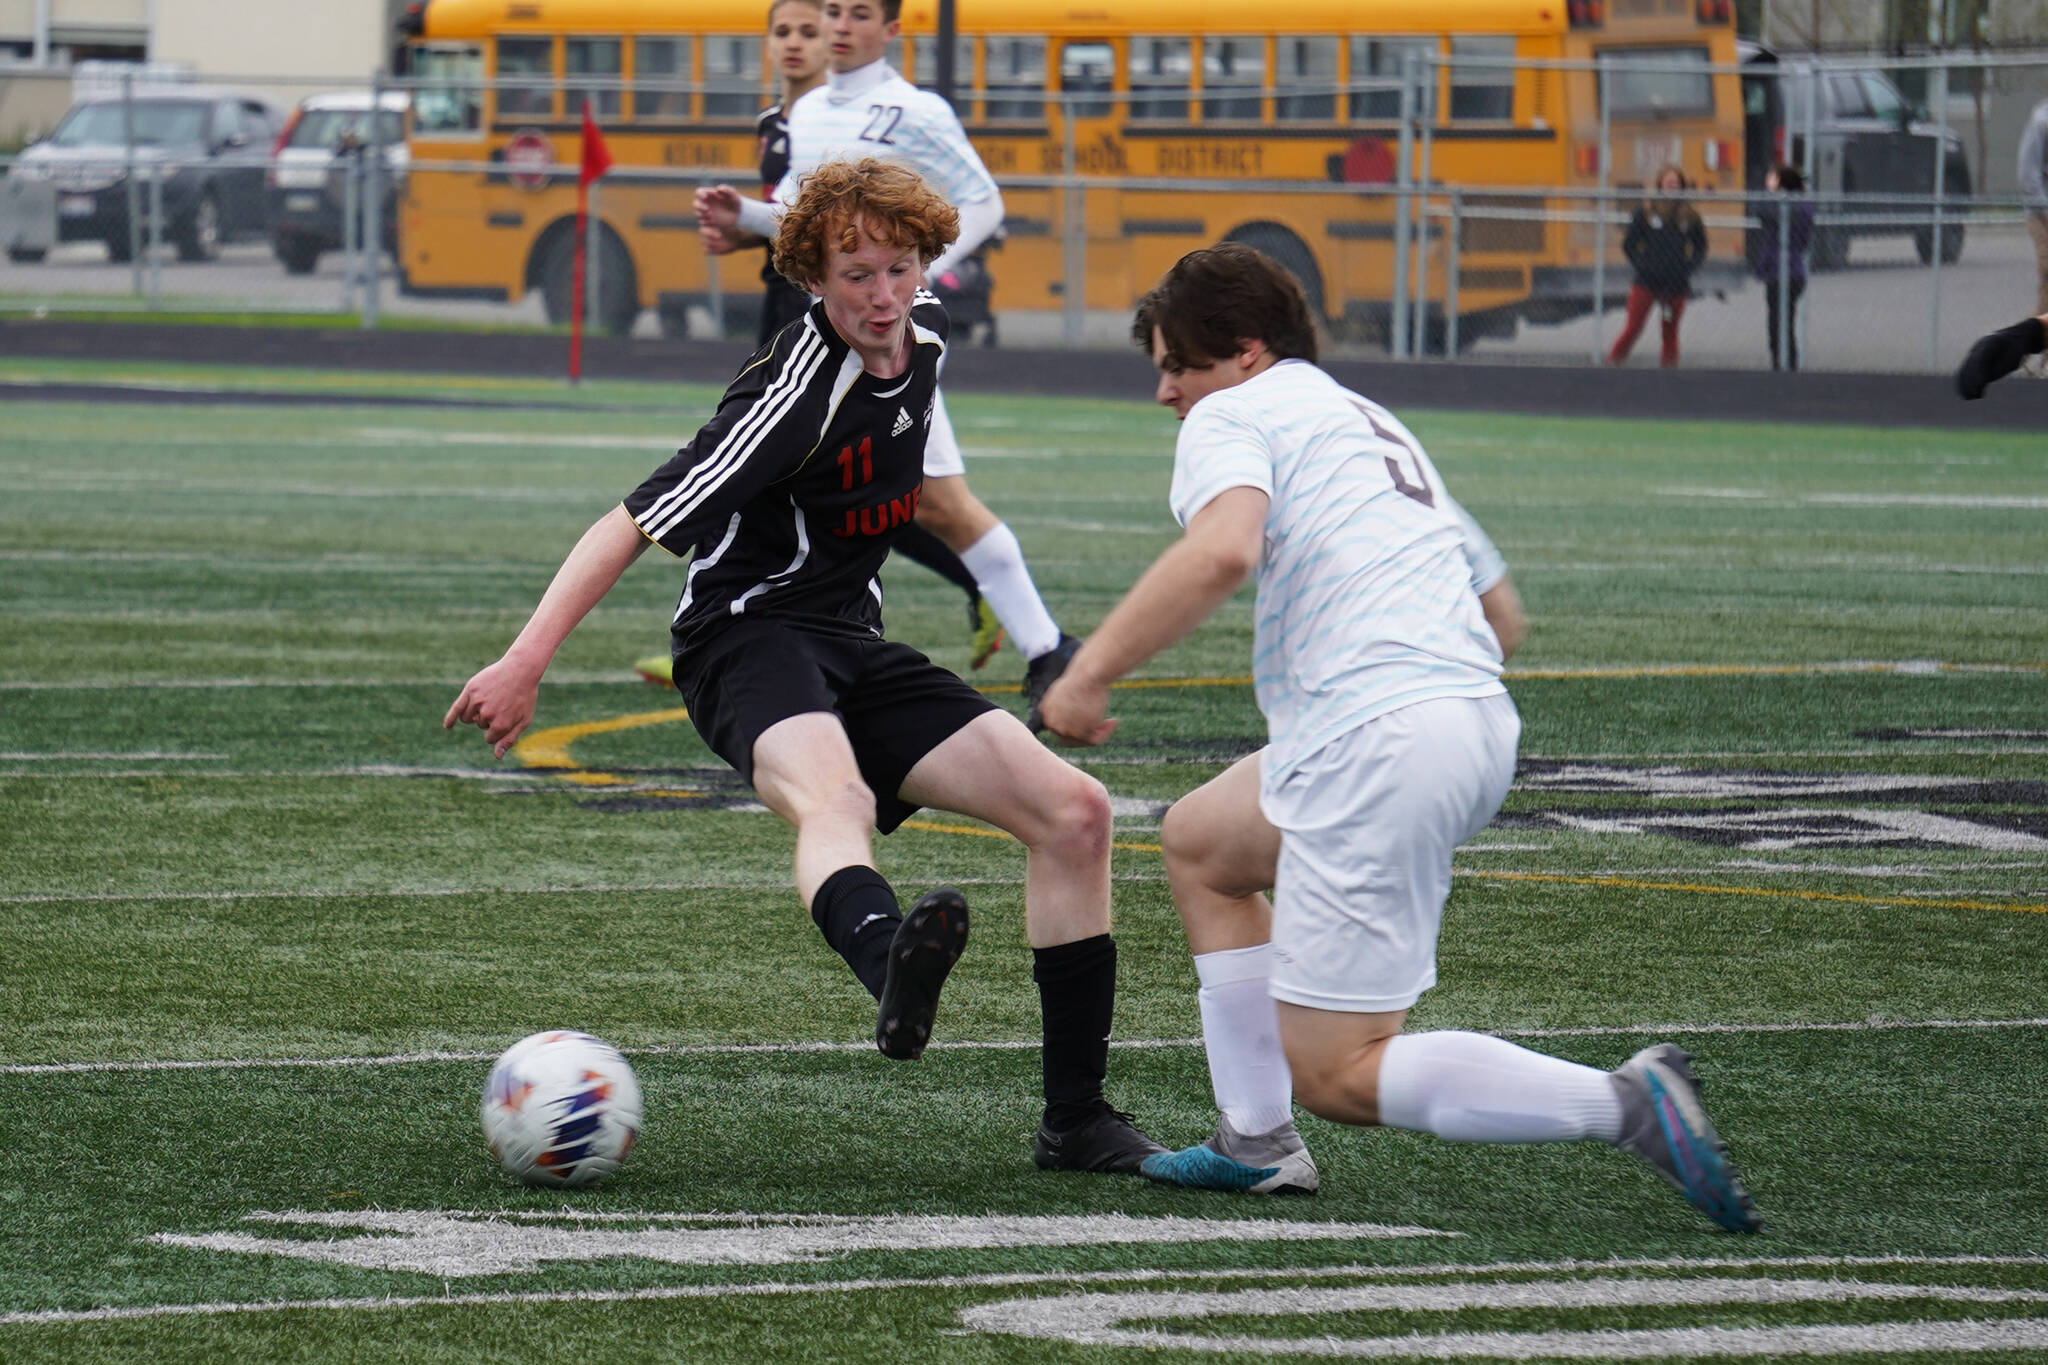 Juneau-Douglas’s Emmett Mesdag battles for the ball with Soldotna’s Gehret Medcoff during the Division II Soccer State Championship on Saturday, May 27, 2023, at West Anchorage High School in Anchorage, Alaska. (Jake Dye/Peninsula Clarion)